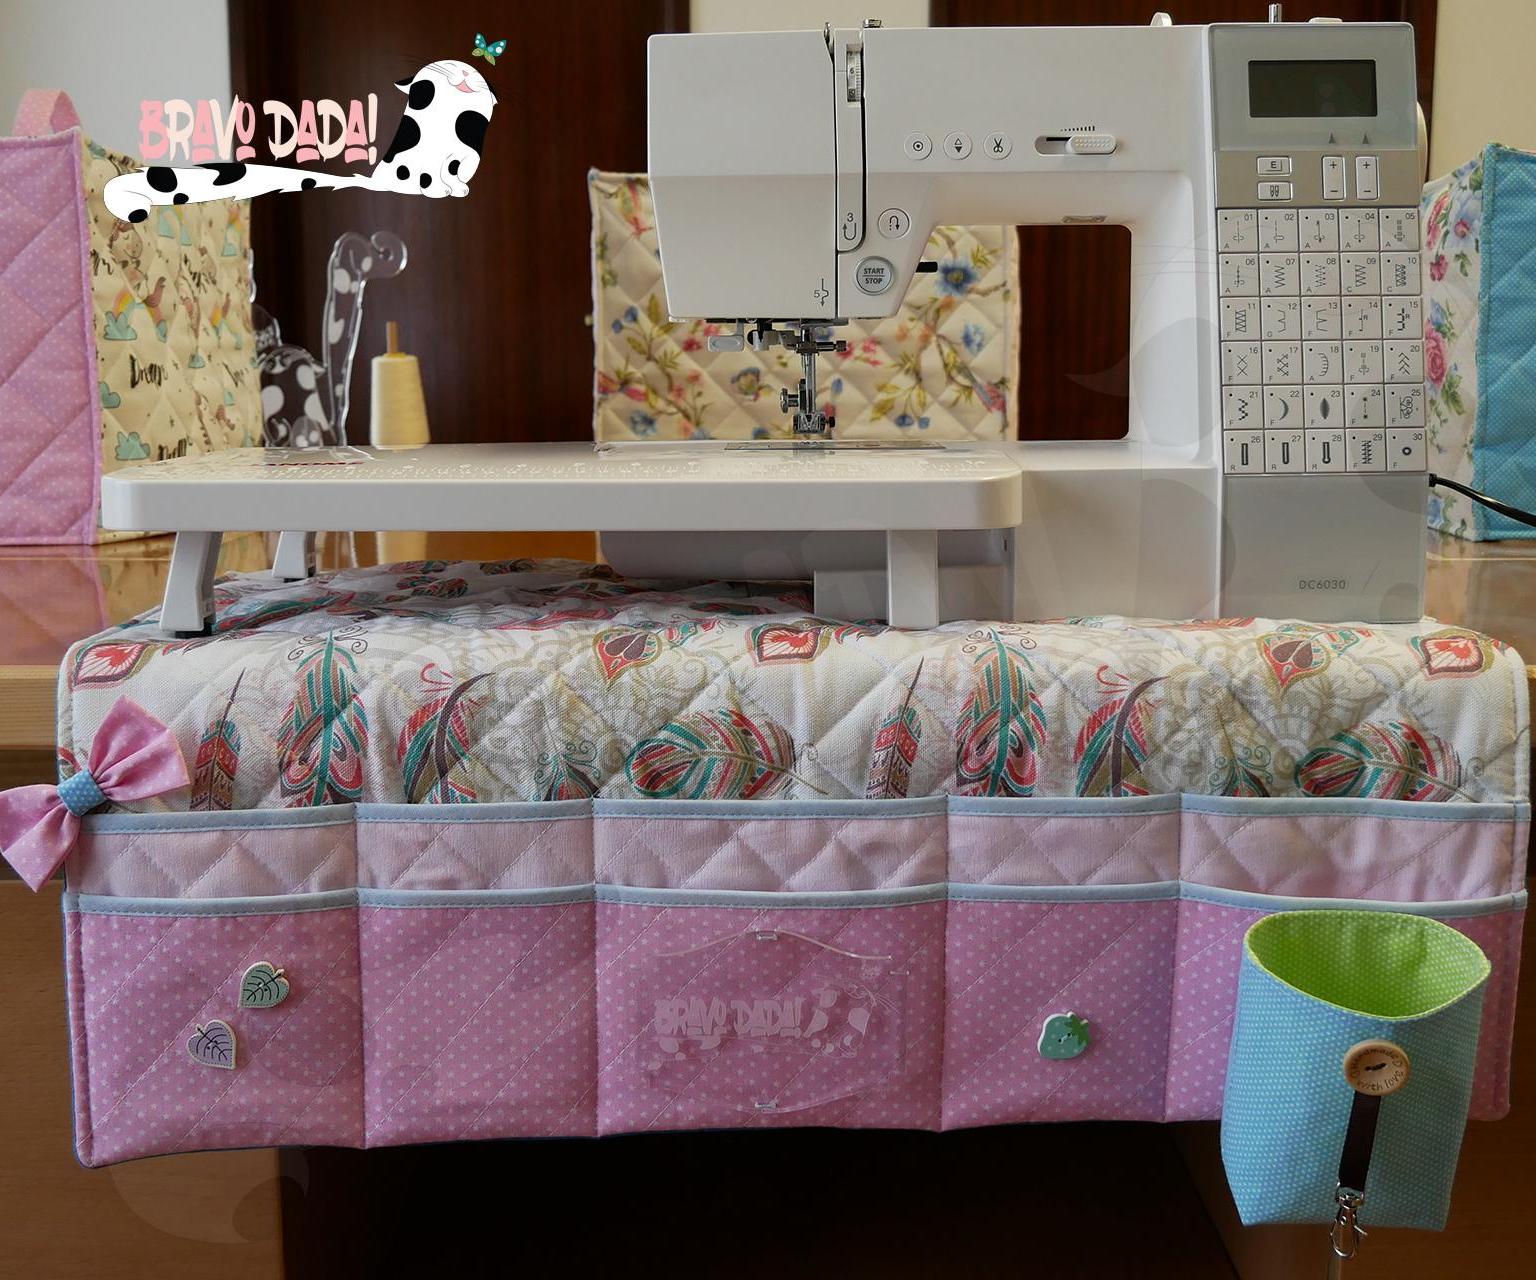 DIY How to Make a Quilted Sewing Machine Mat With Pockets and Thread Catcher - Bravo Dada! Sewing Tutorial